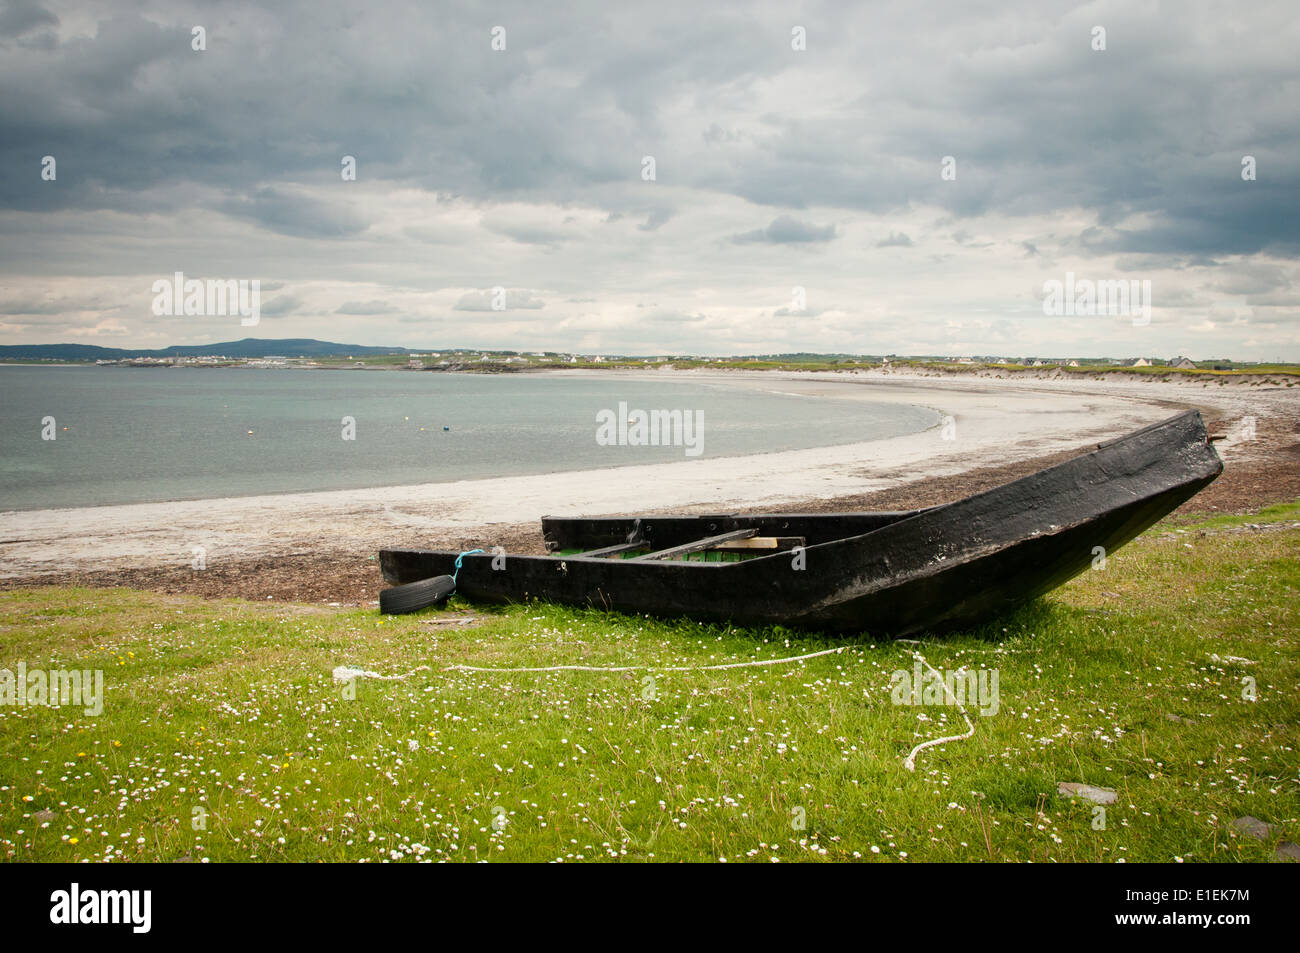 Old and Battered Currach Traditional Boat drawn up on Beach on West Coast of Ireland Stock Photo